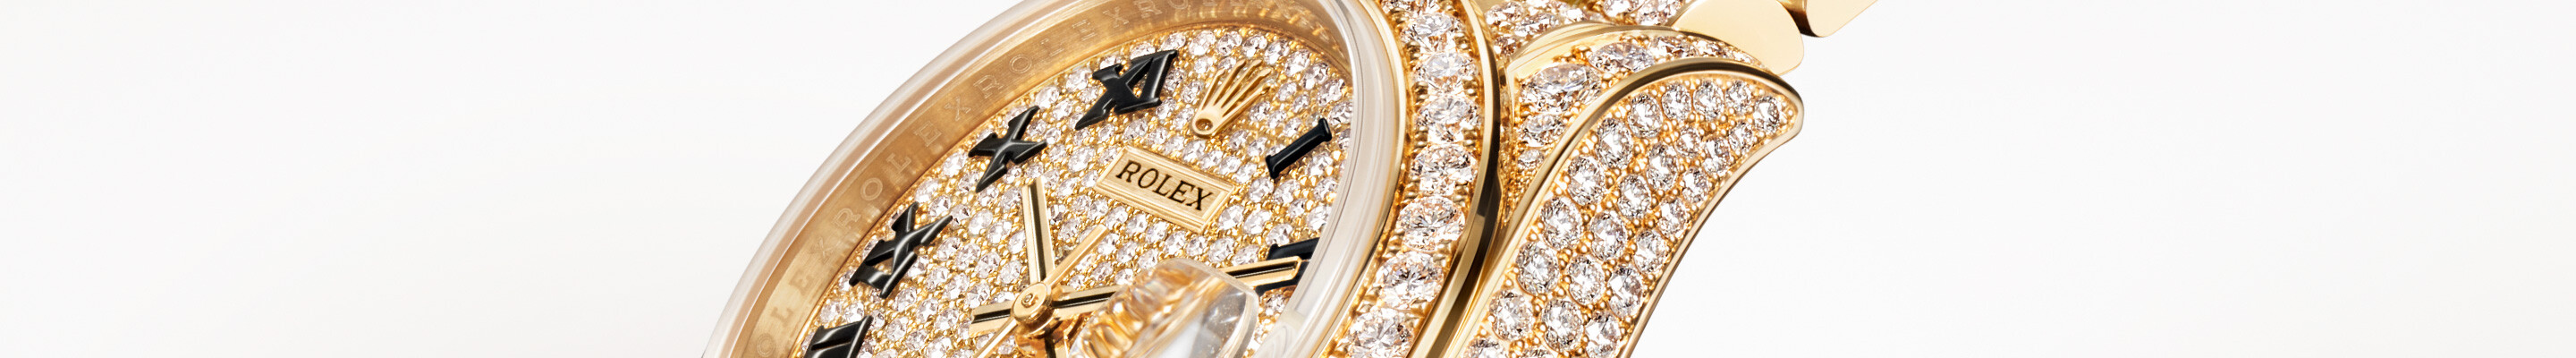 Rolex Lady-Datejust at Frayssinet Joaillier